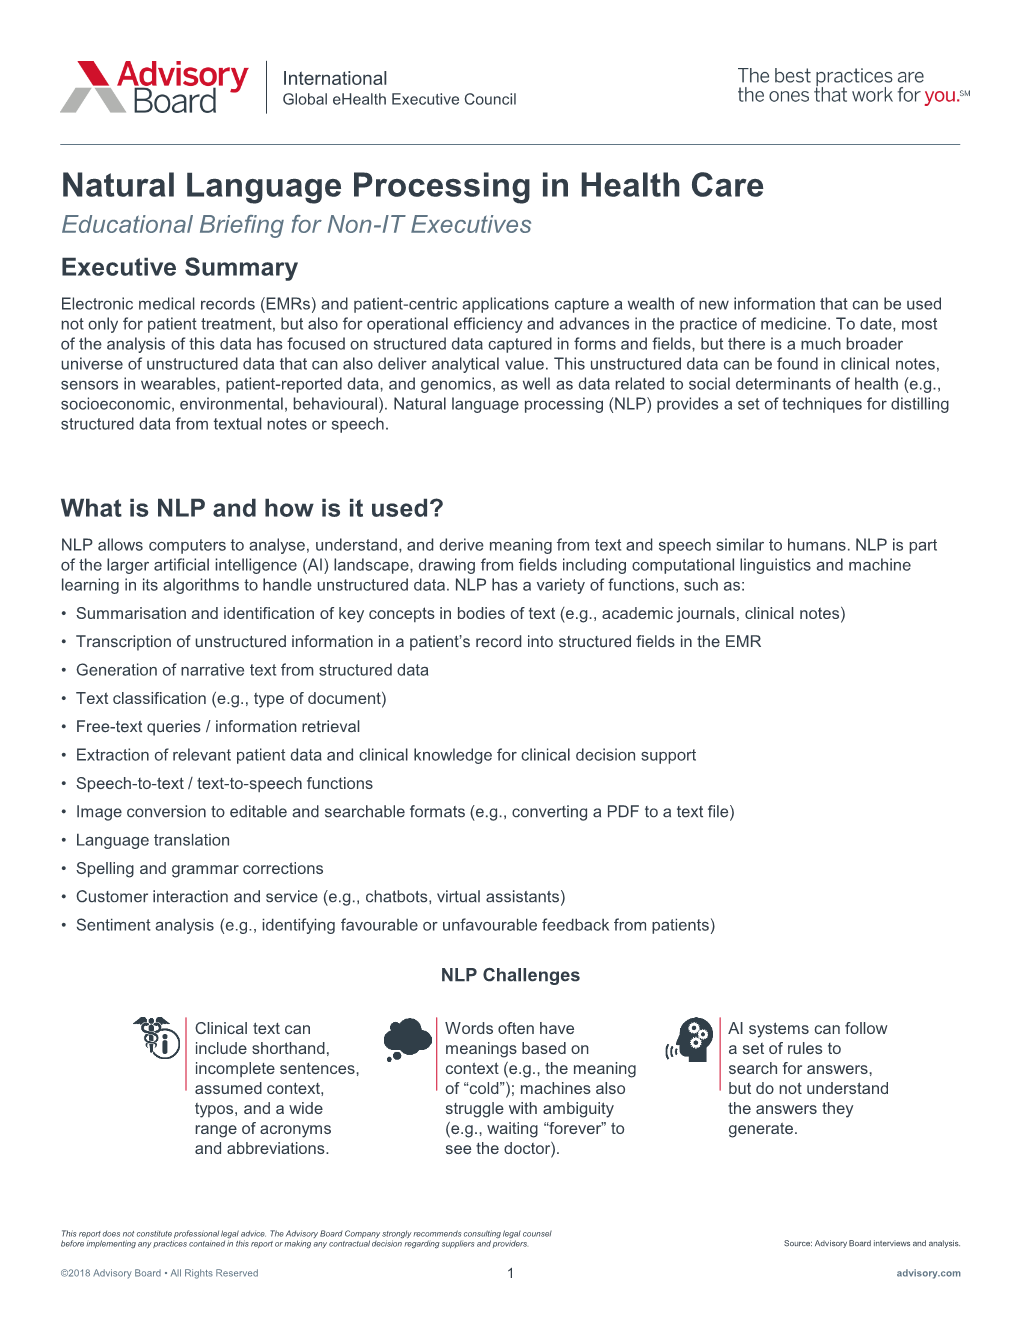 Natural Language Processing in Health Care